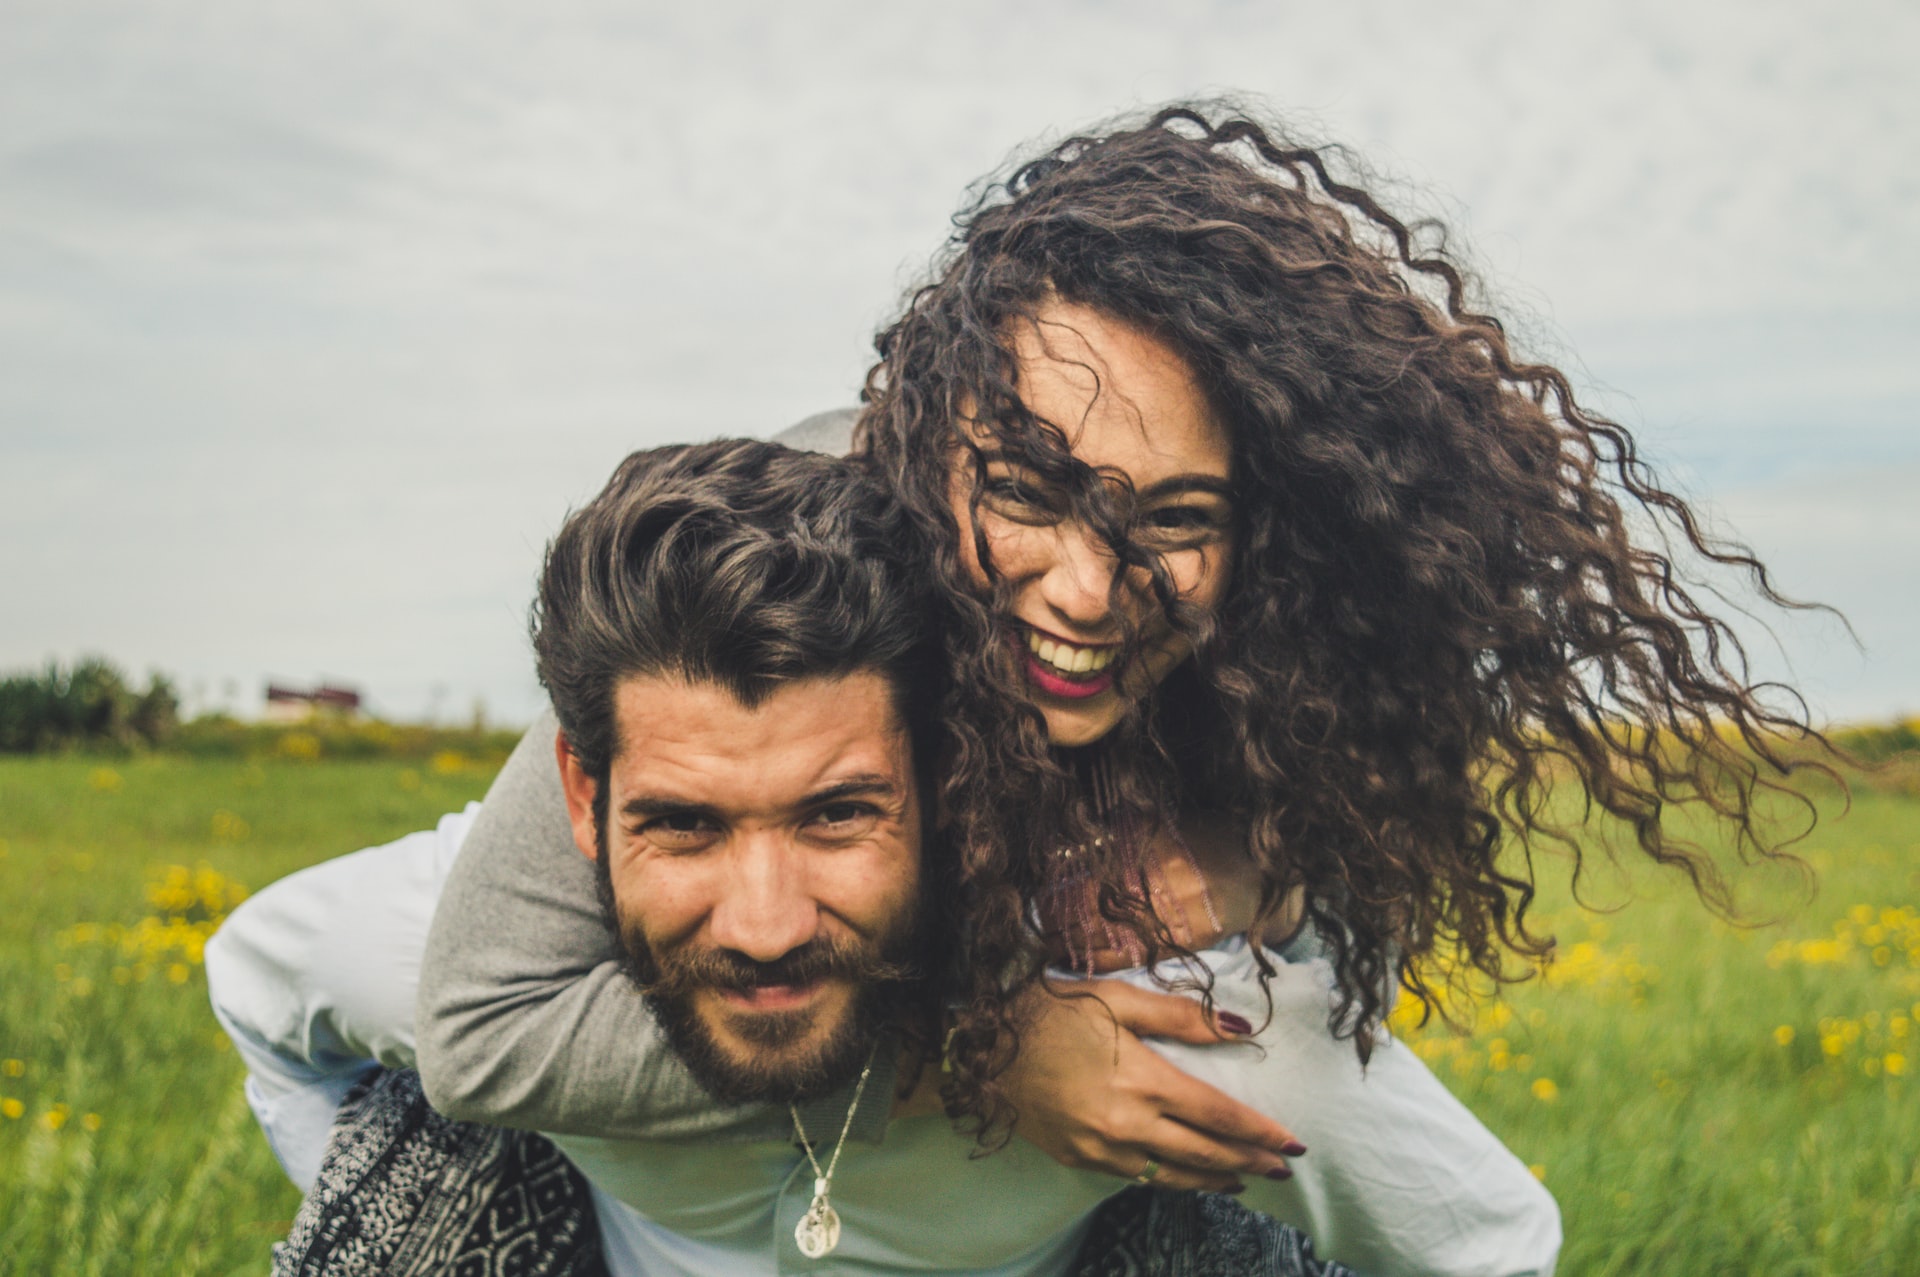 5 Things to Consider When Starting a New Relationship